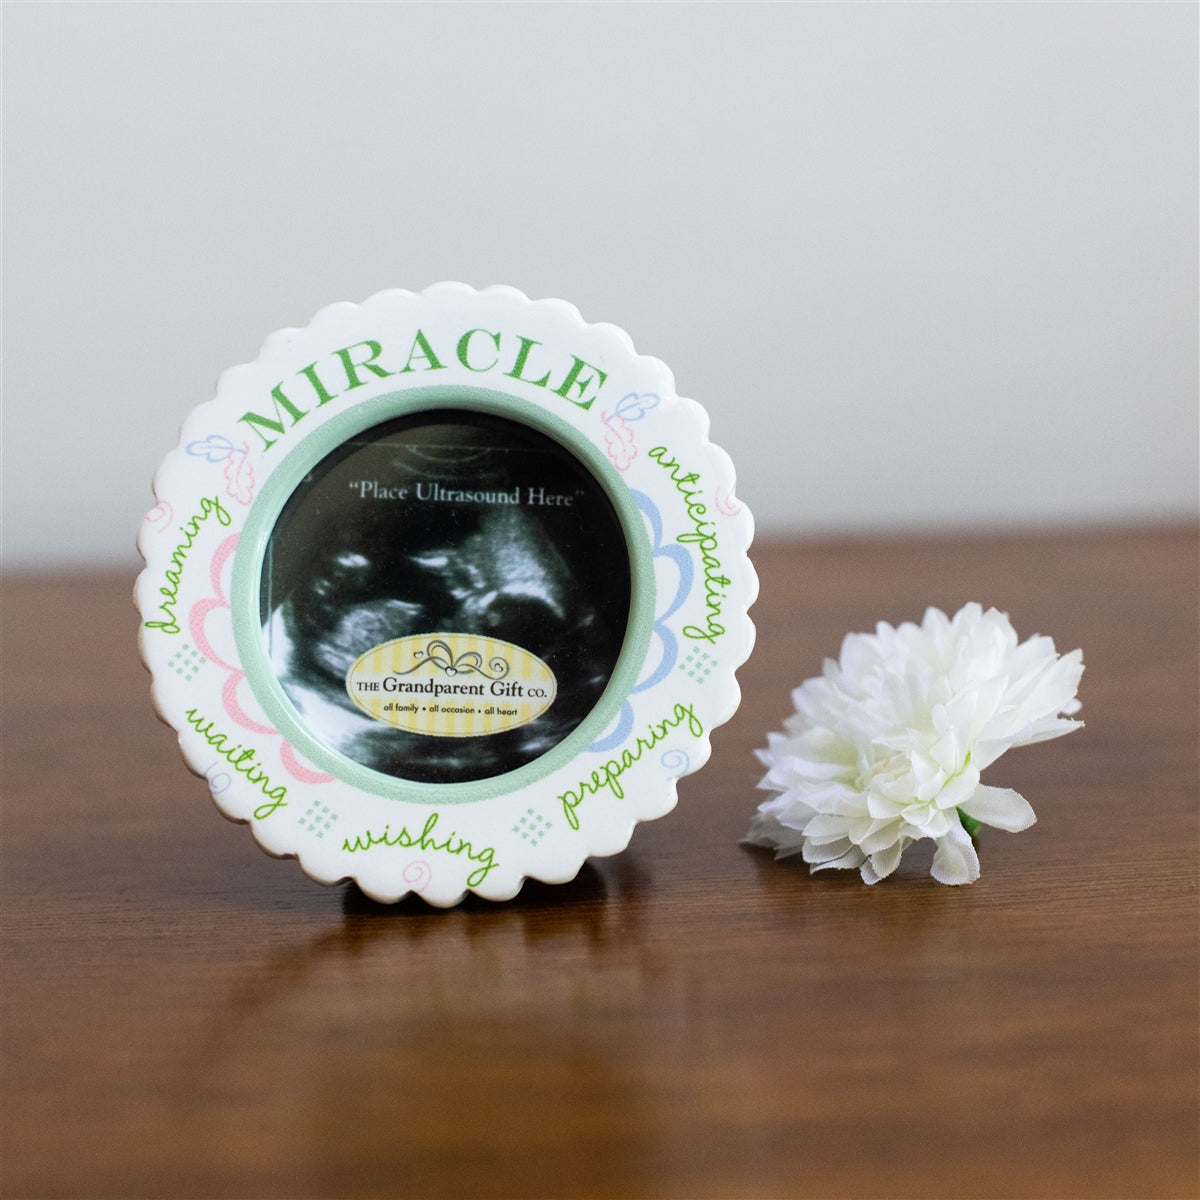 Miracle Ultrasound Ornament: Boxed with Poem and Scripture